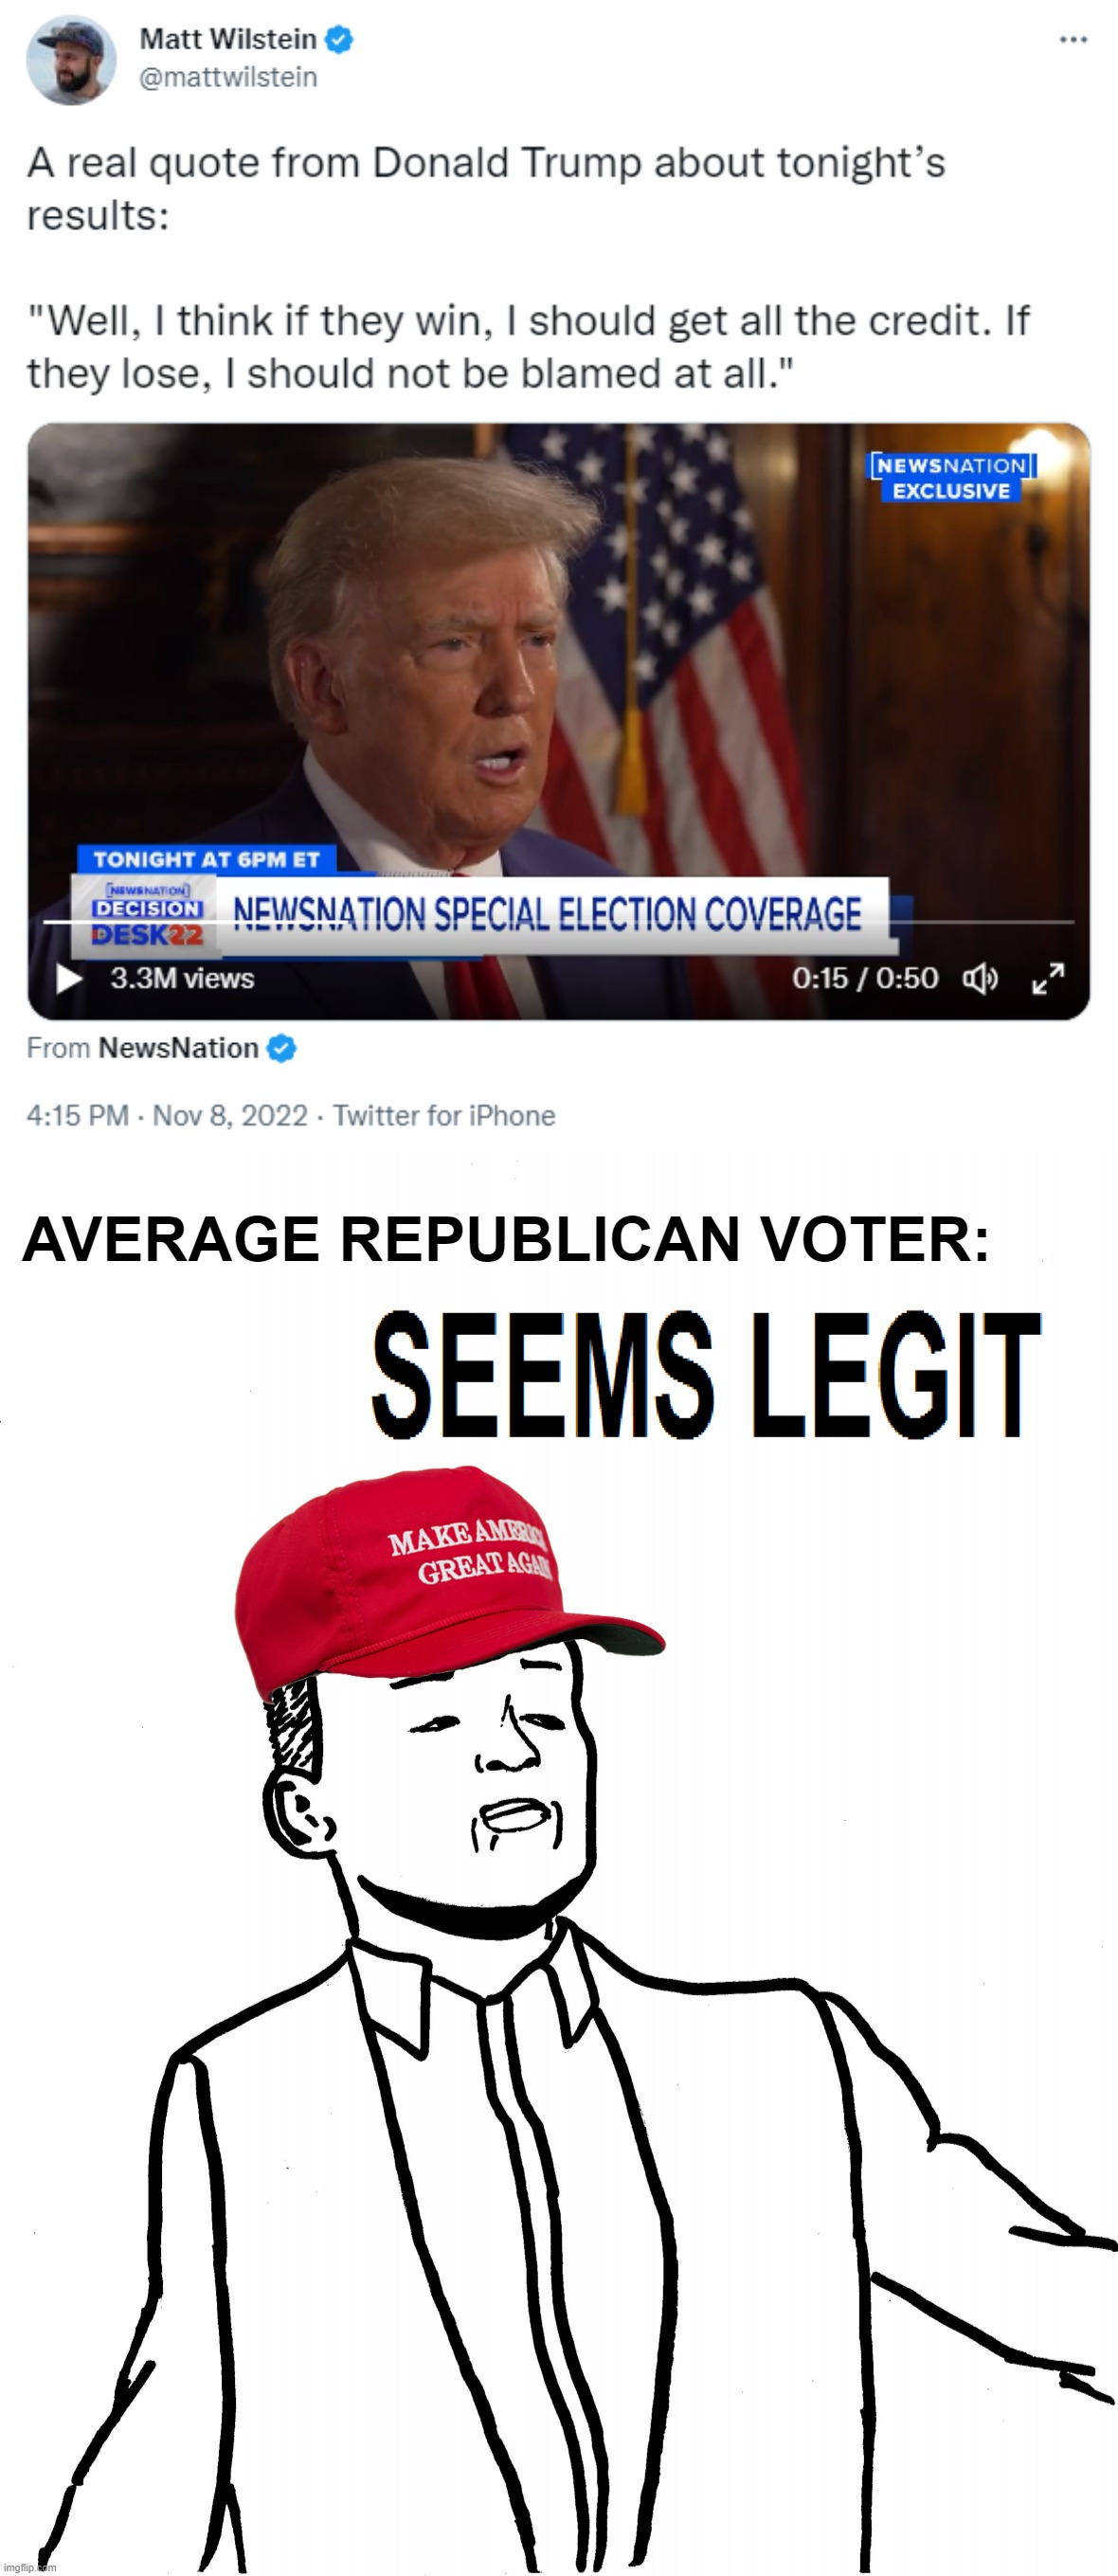 AVERAGE REPUBLICAN VOTER: | image tagged in a real quote from donald trump about the 2022 midterms,seems legit | made w/ Imgflip meme maker